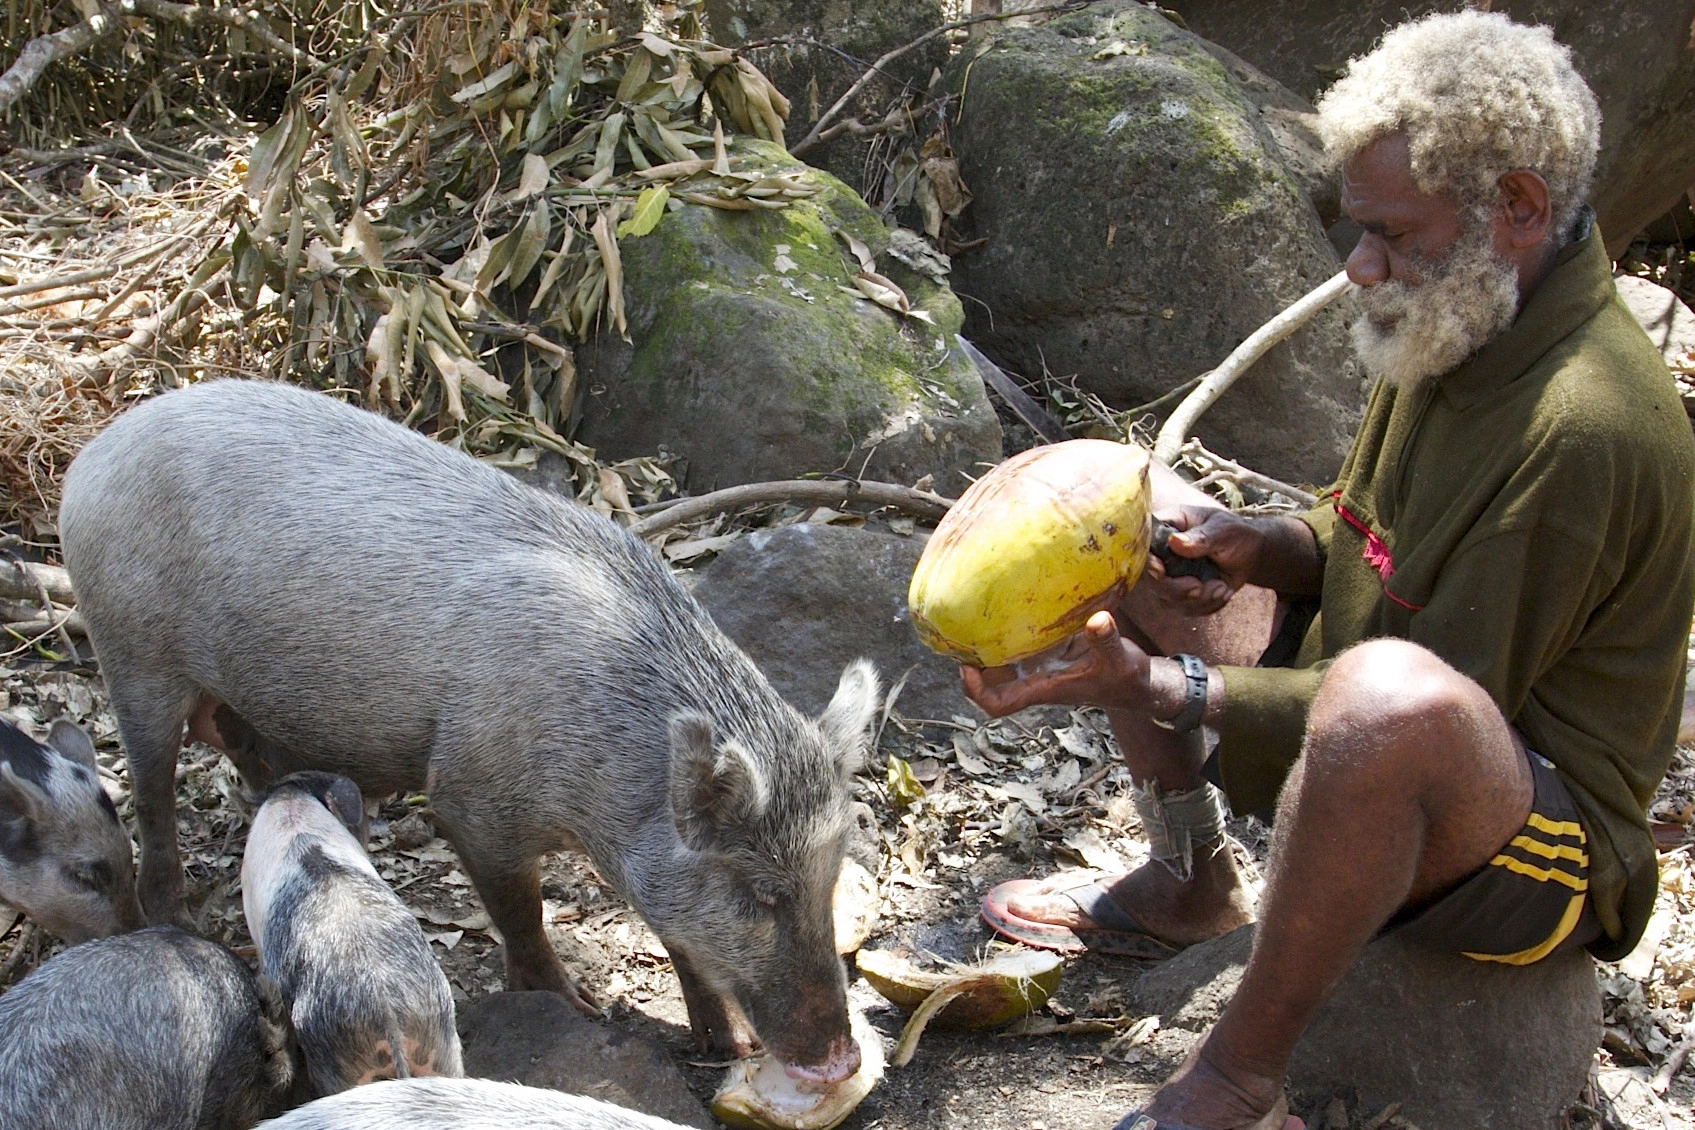 Protecting animals on the worst hit islands after Cyclone Pam